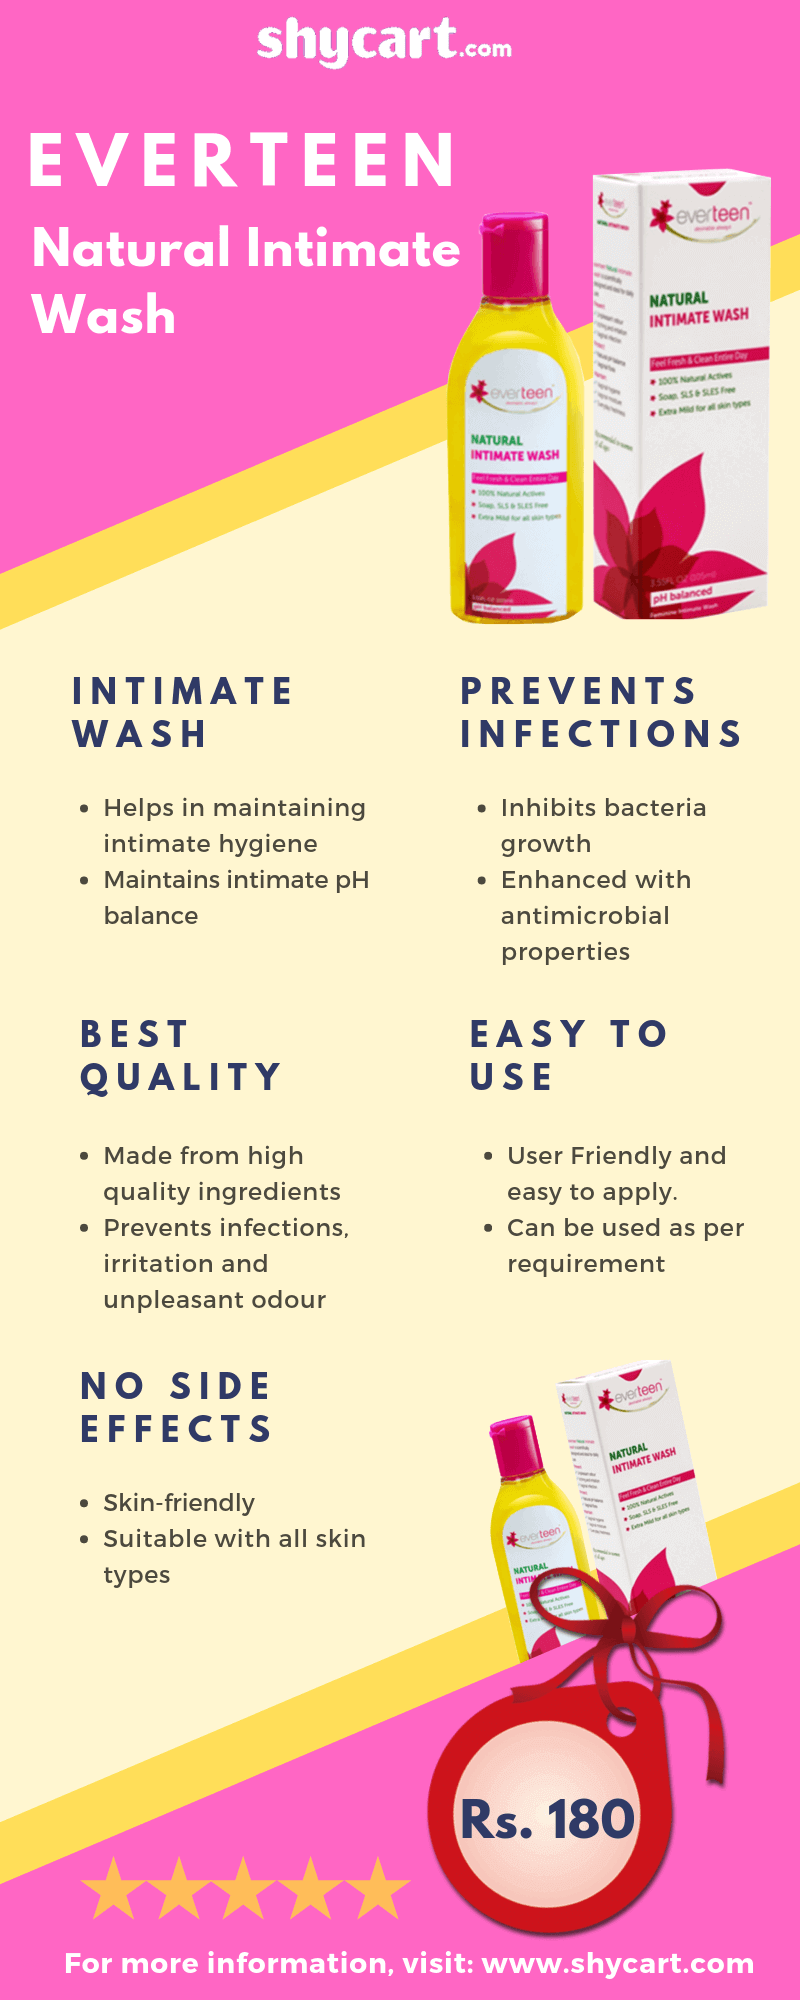 Everteen Natural Intimate Wash - Infographic